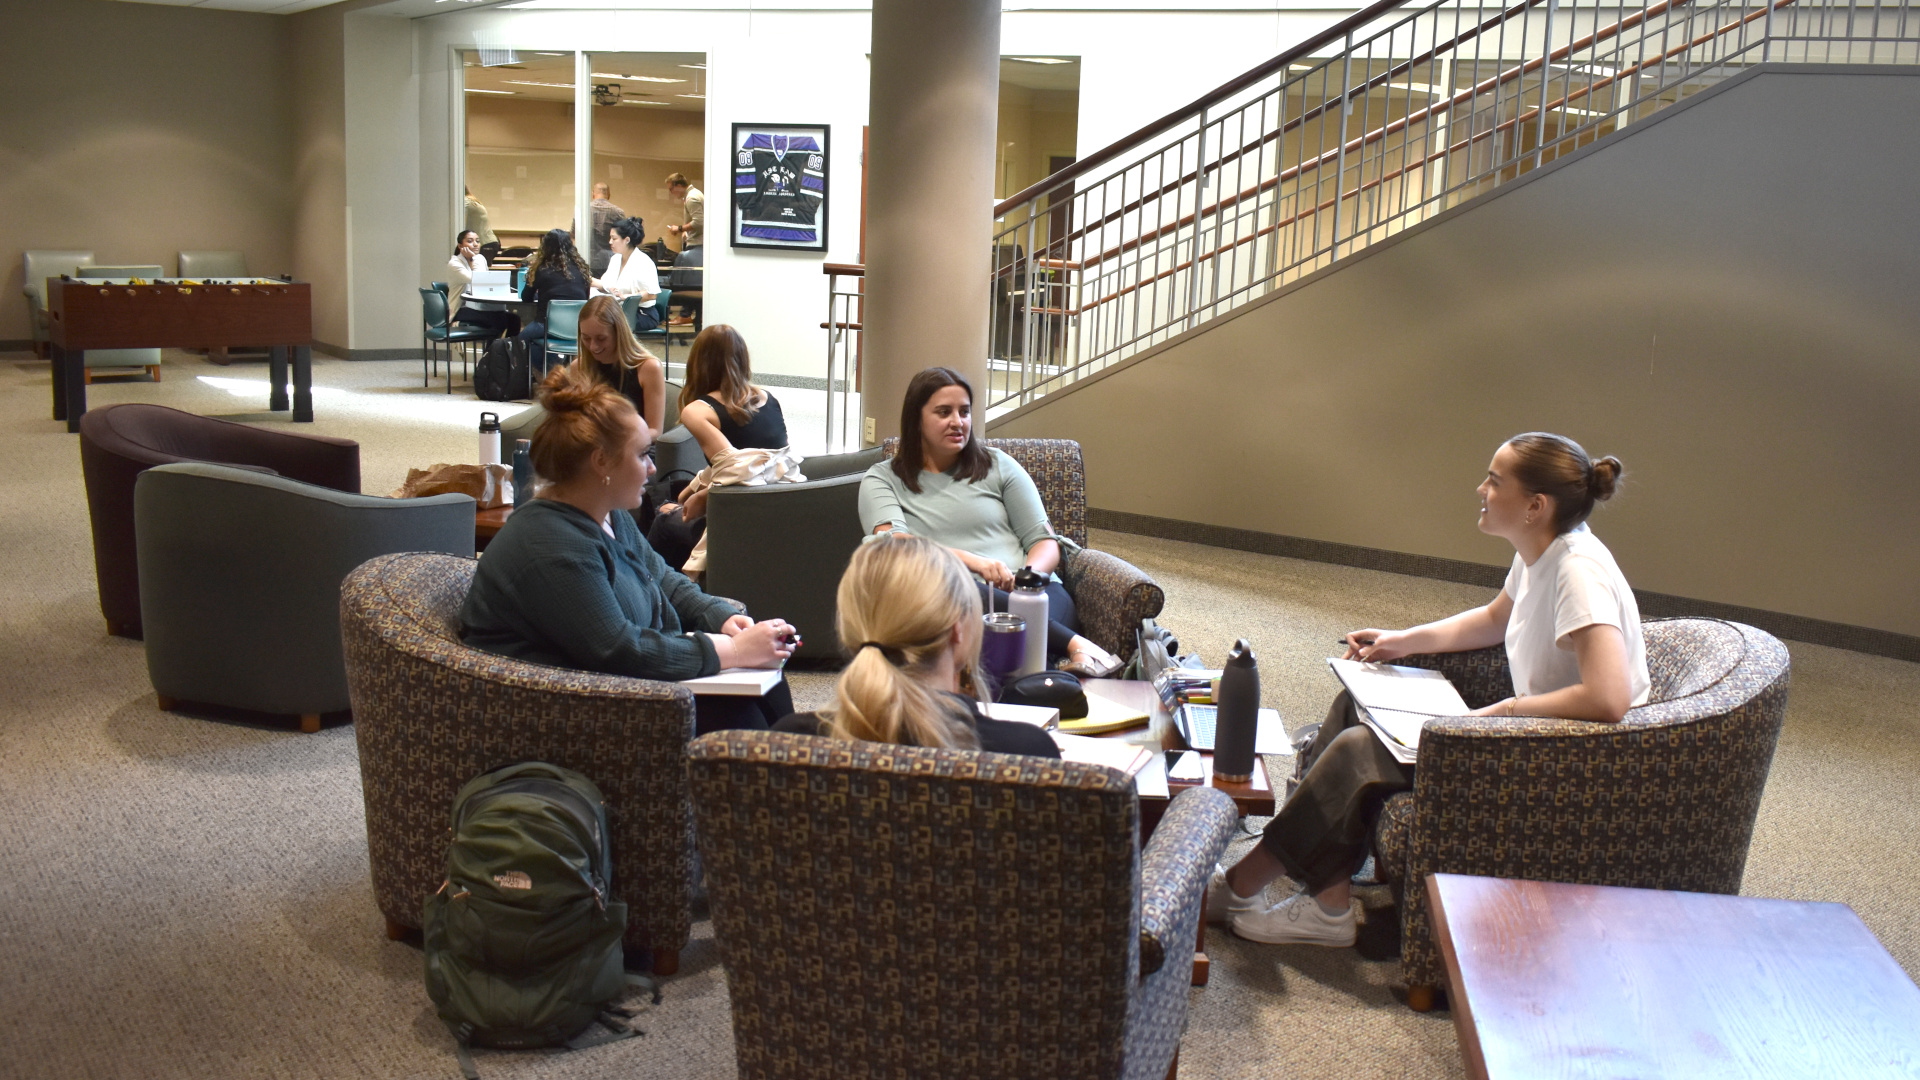 Law students gather in the lower level to study